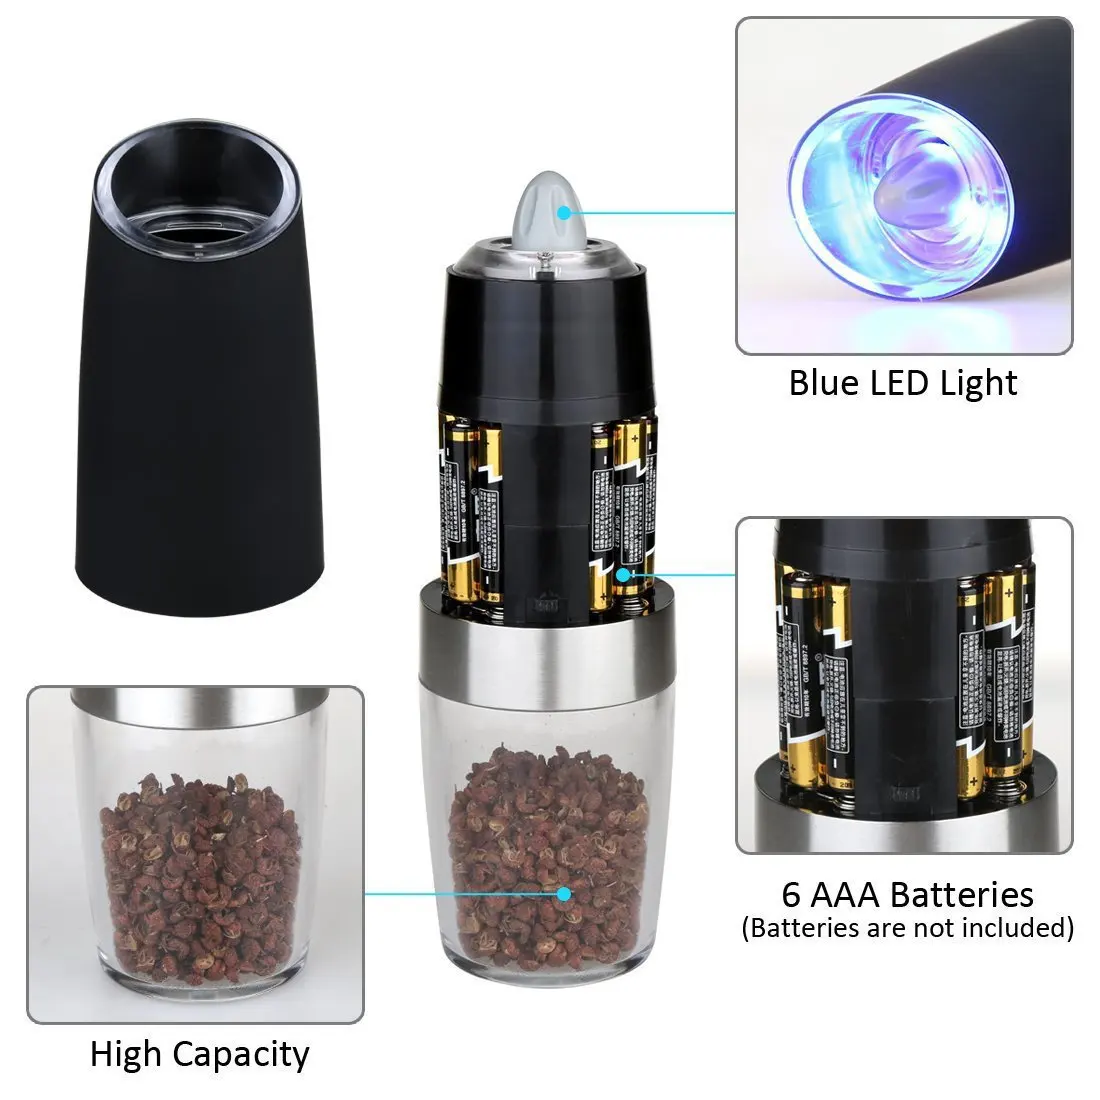 https://ae01.alicdn.com/kf/S830dedb75f3a4df89a0a3fd98104deaey/Electric-Automatic-Salt-Pepper-Grinder-Stainless-Steel-Gravity-Spice-Mill-Adjustable-Spices-Grinder-with-LED-Light.jpg